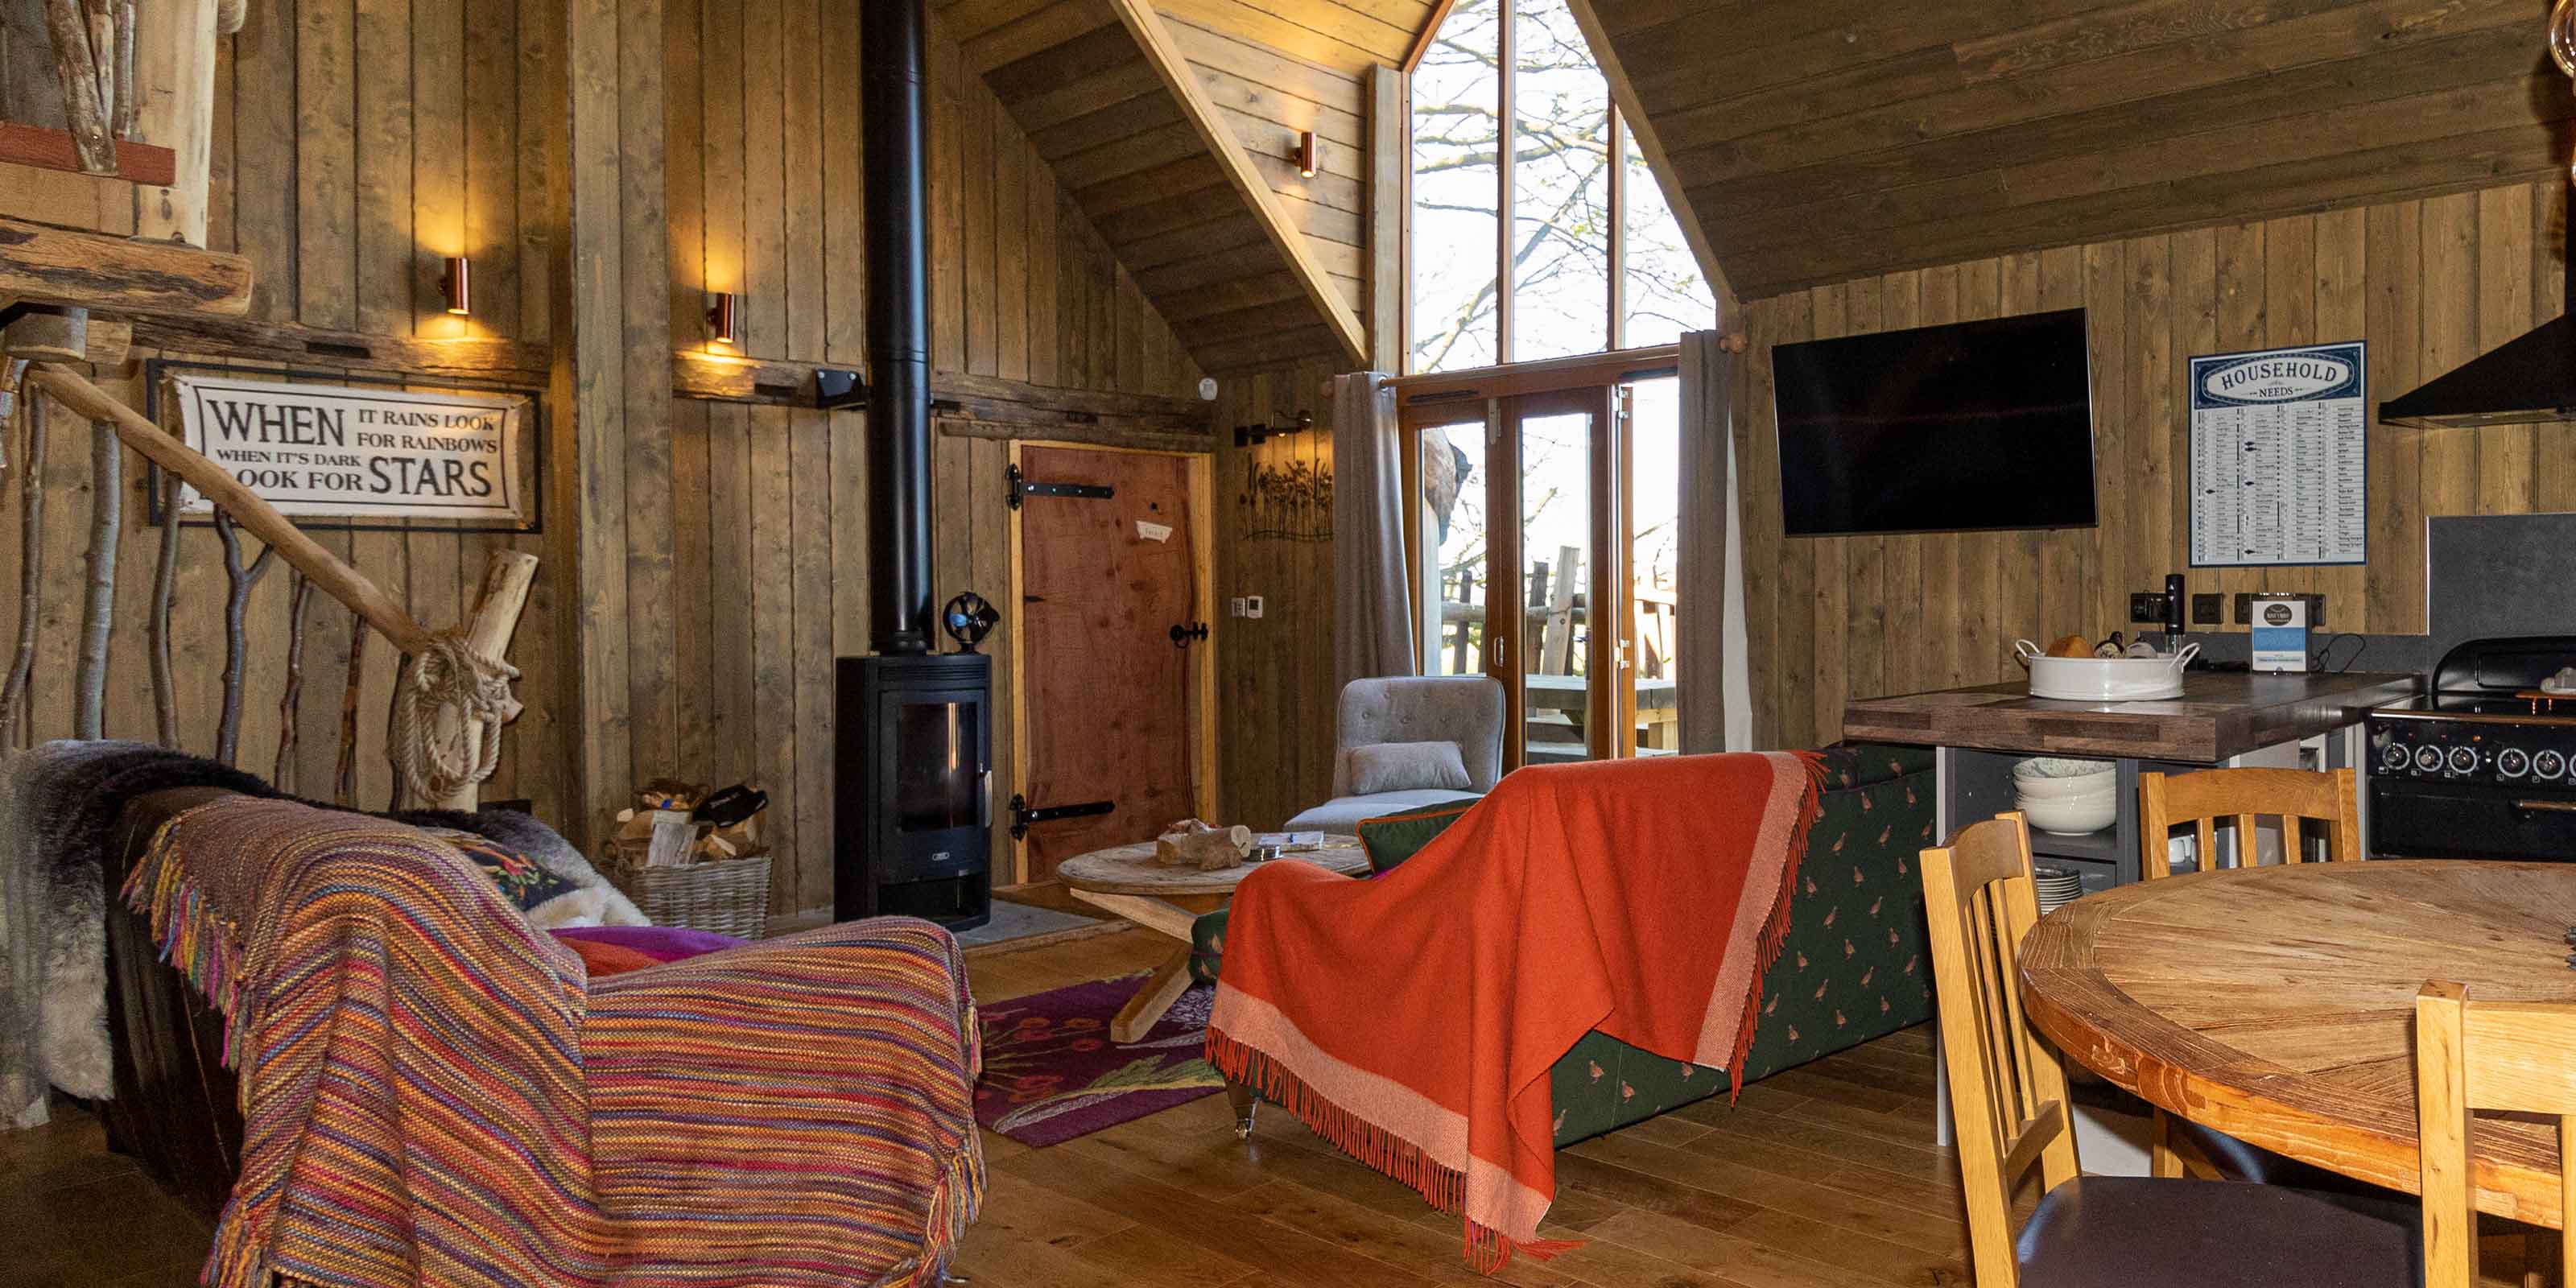 Interior of our luxury tree house holidays & treehouse breaks. Perfect for family holiday Yorkshire & York glamping hot tub. 